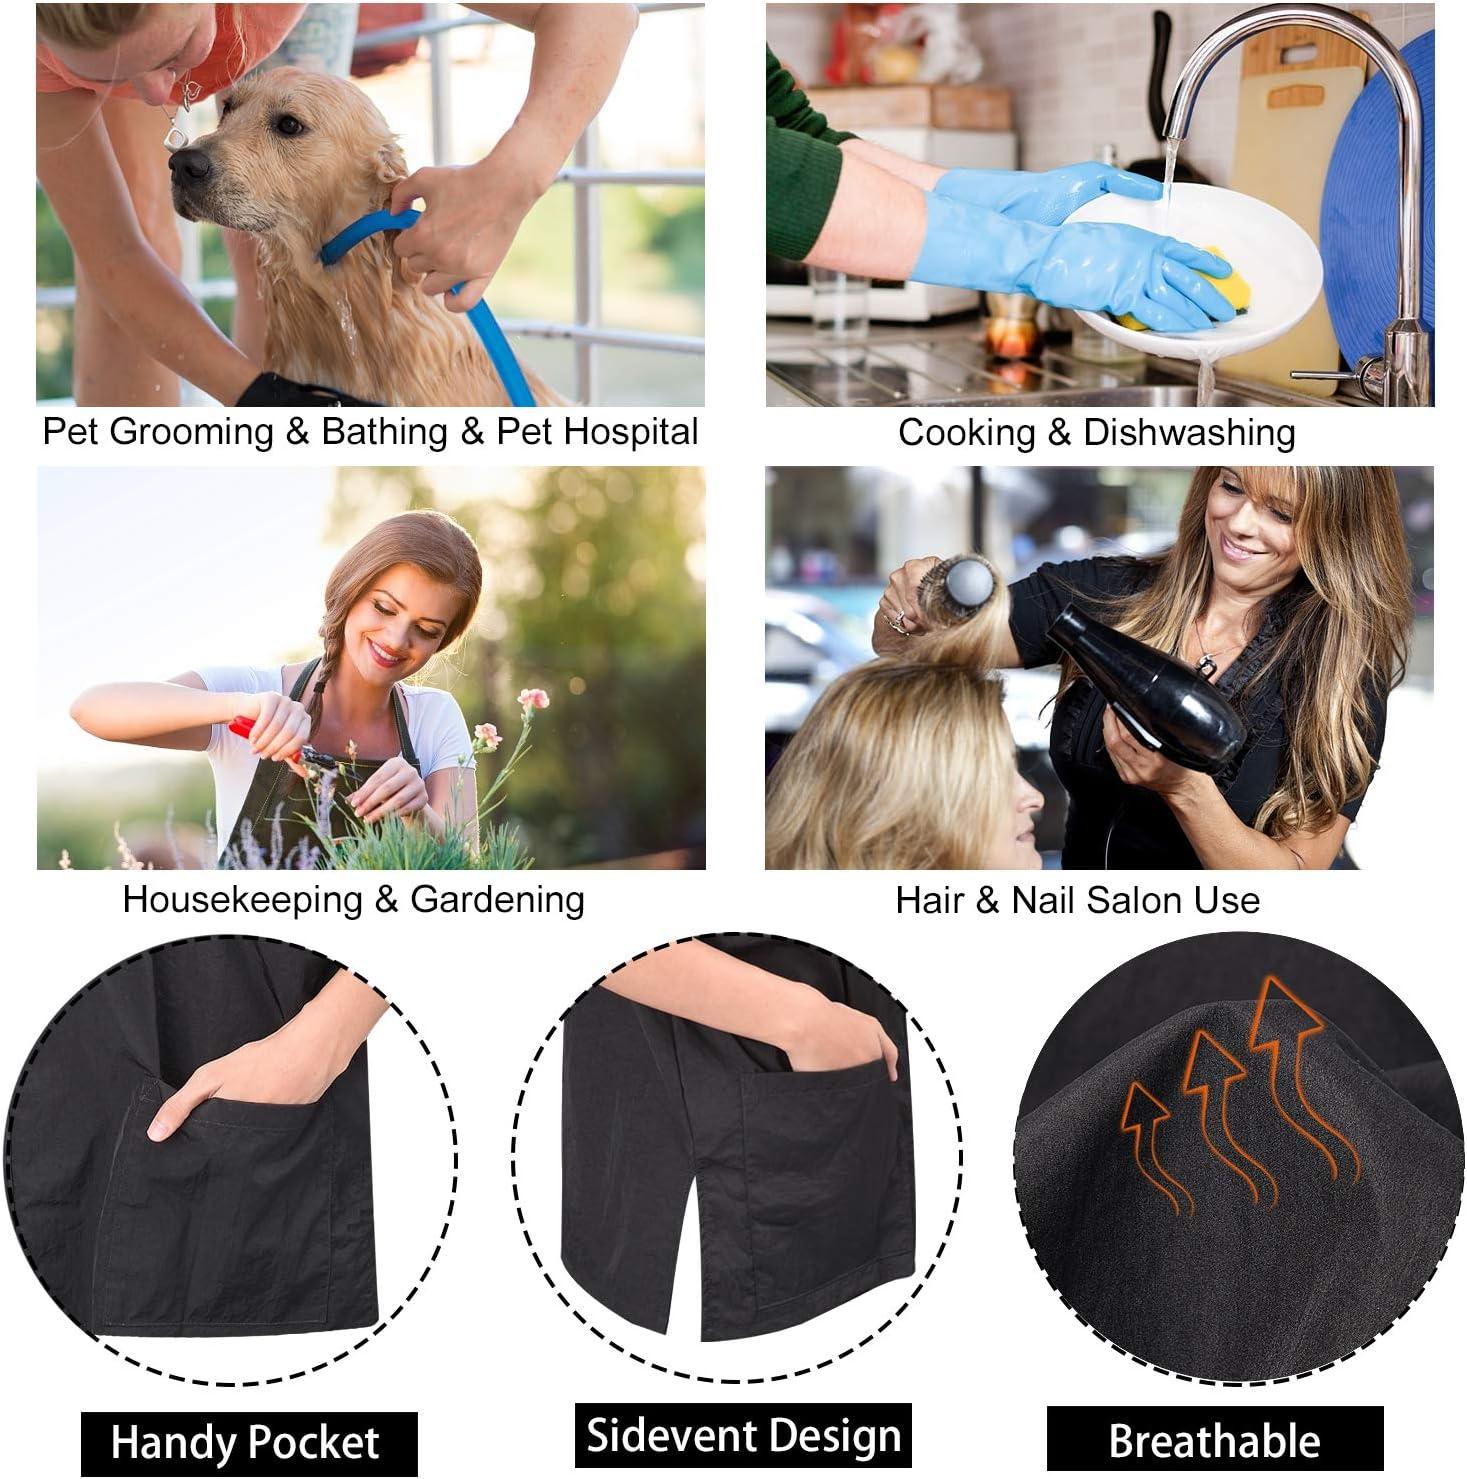 Hair Resistant Dog Grooming Clothes